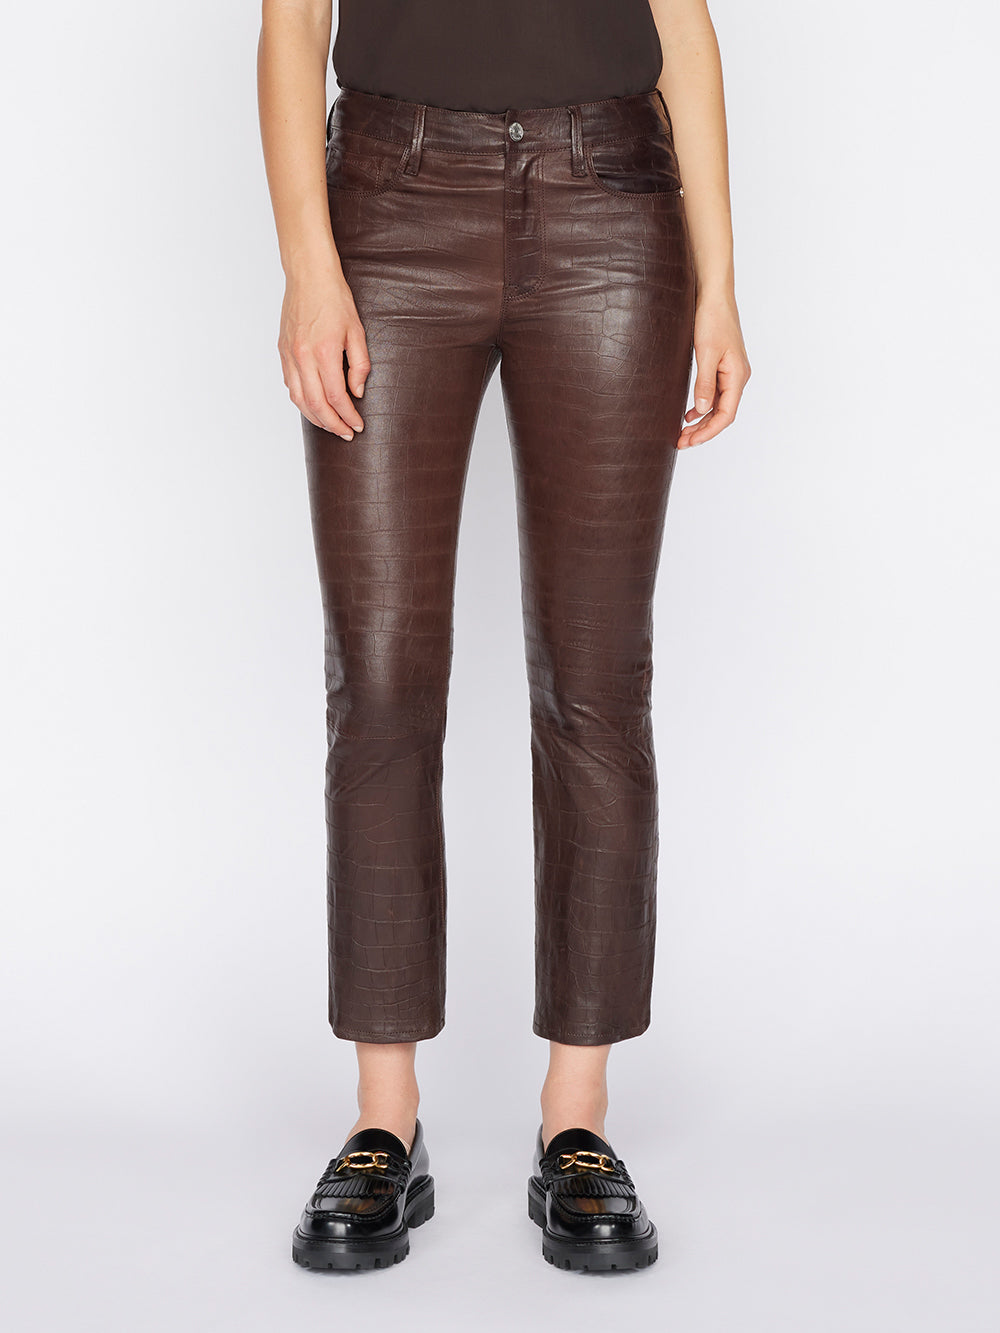 Slacks and Chinos Skinny trousers Womens Clothing Trousers FRAME Le High Leather Skinny Pants in Blue 